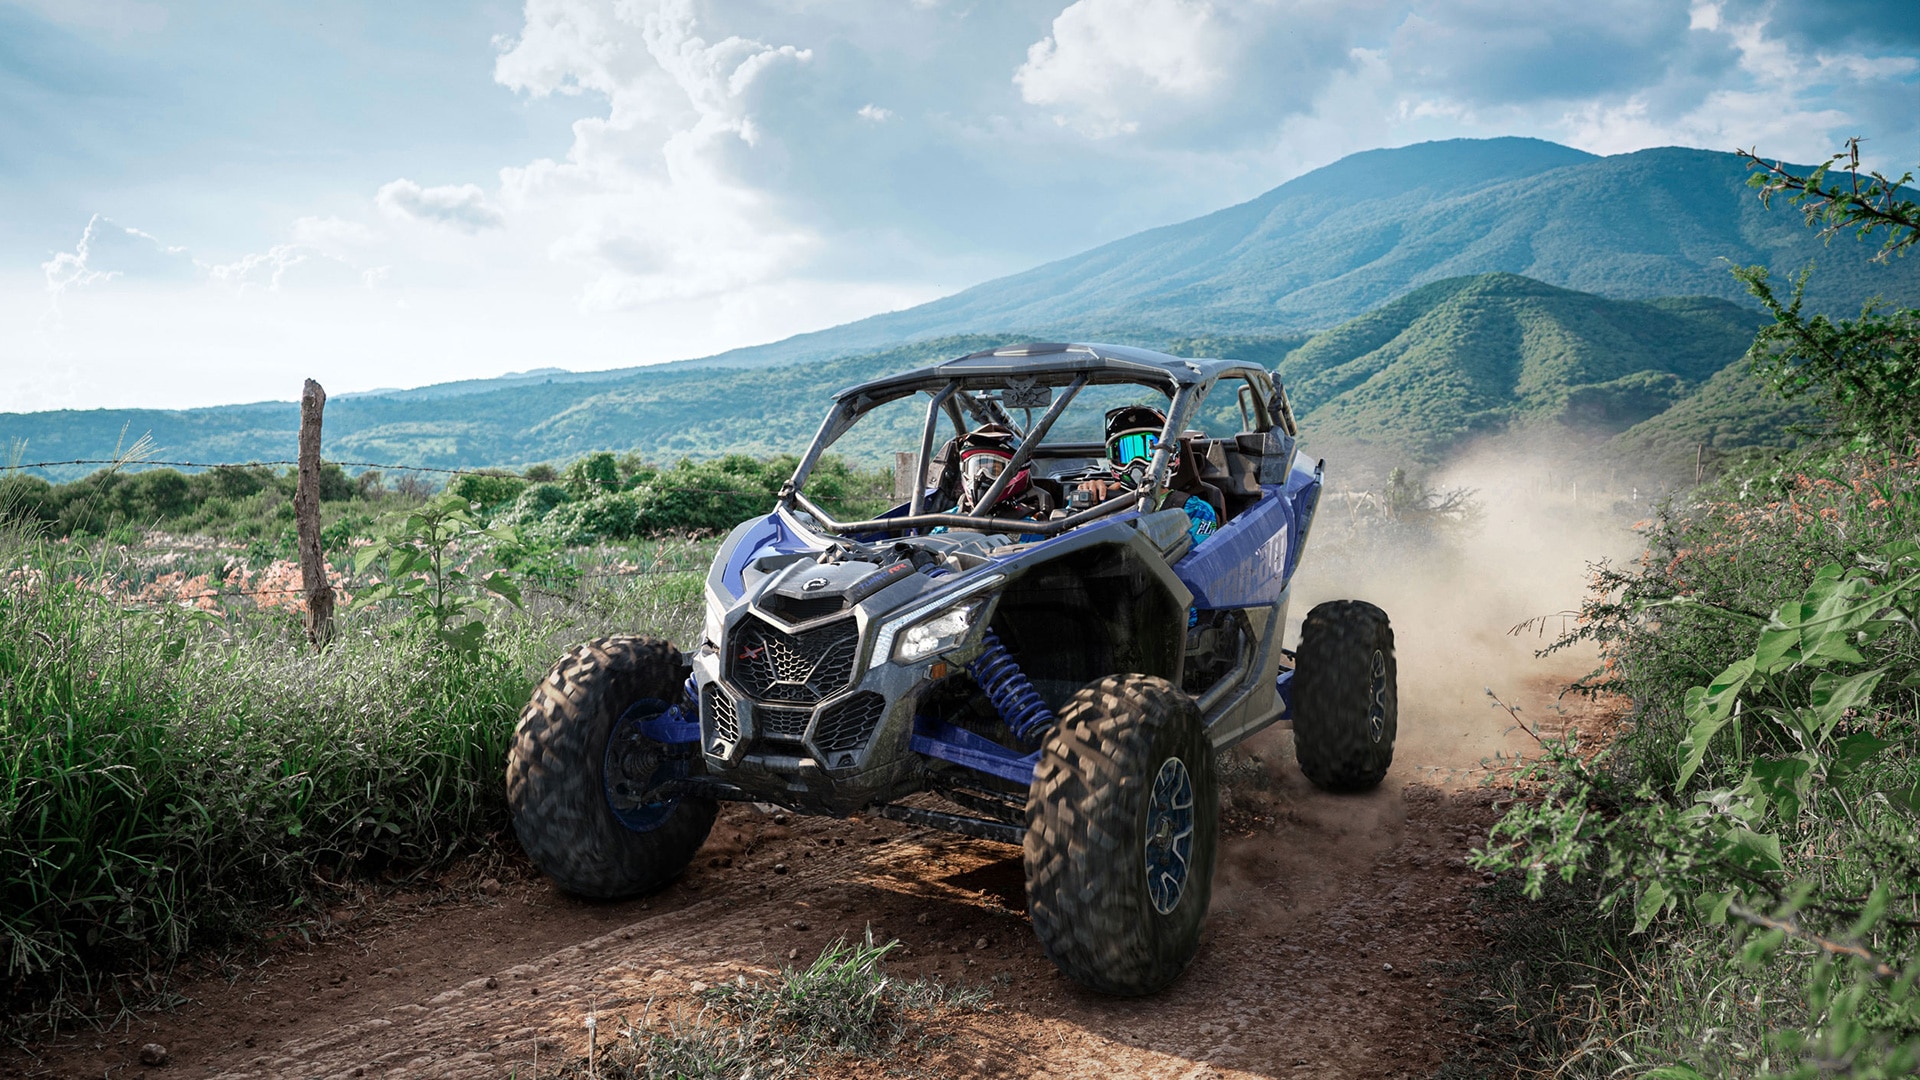 2 people driving a Can-Am Maverick X3 in a off-road trail